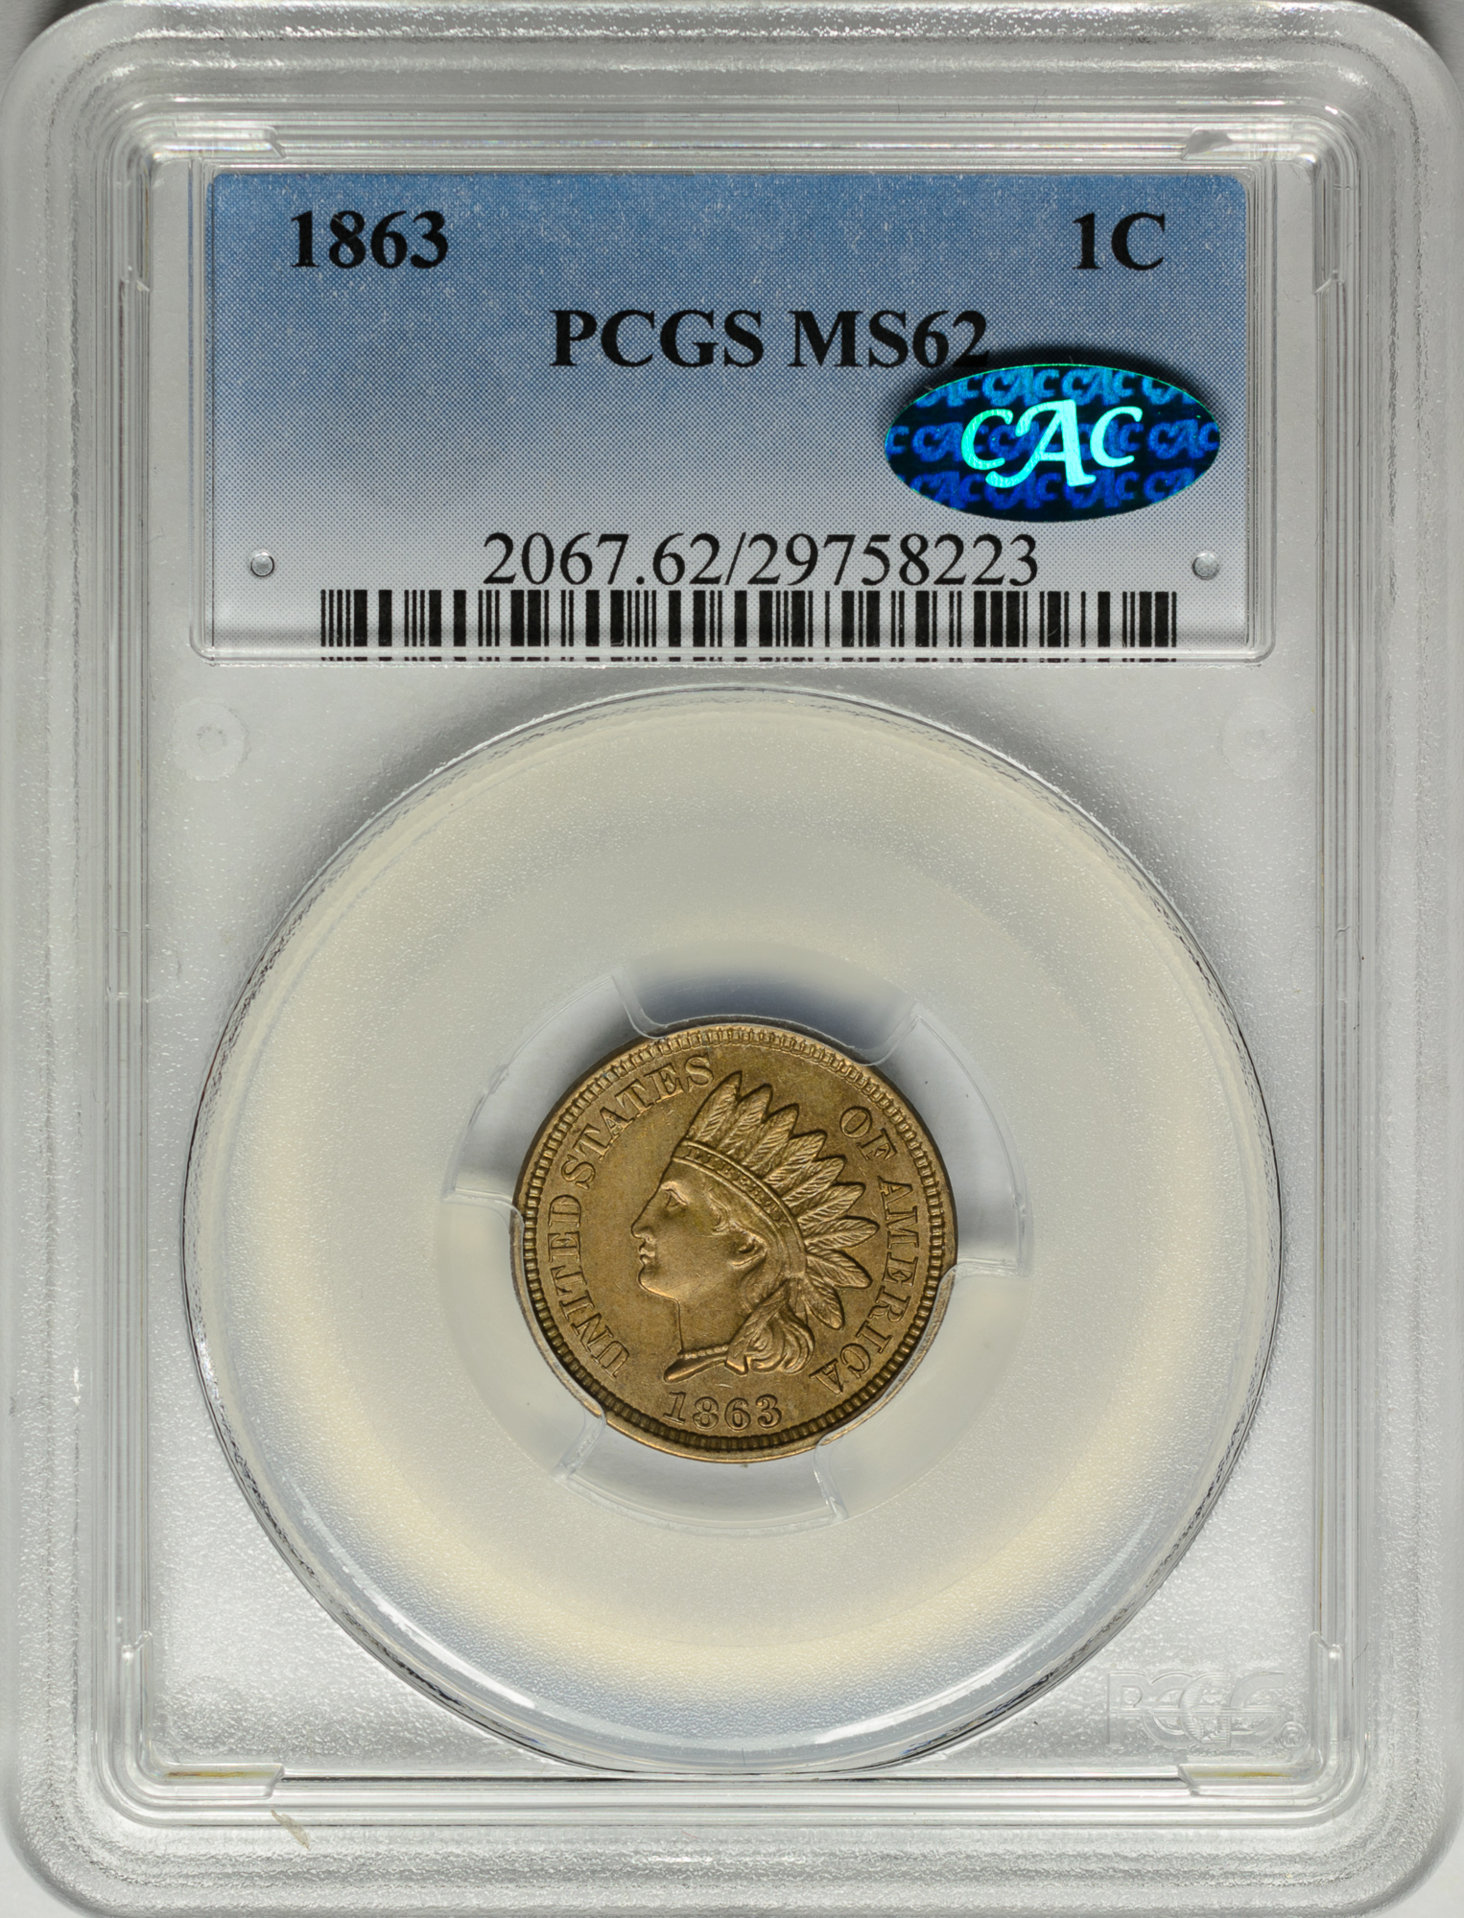 1863 1C CENT - INDIAN HEAD, COPPER-NICKEL WITH SHIELD PCGS MS62 29758223 CAC Obv Slab.jpg